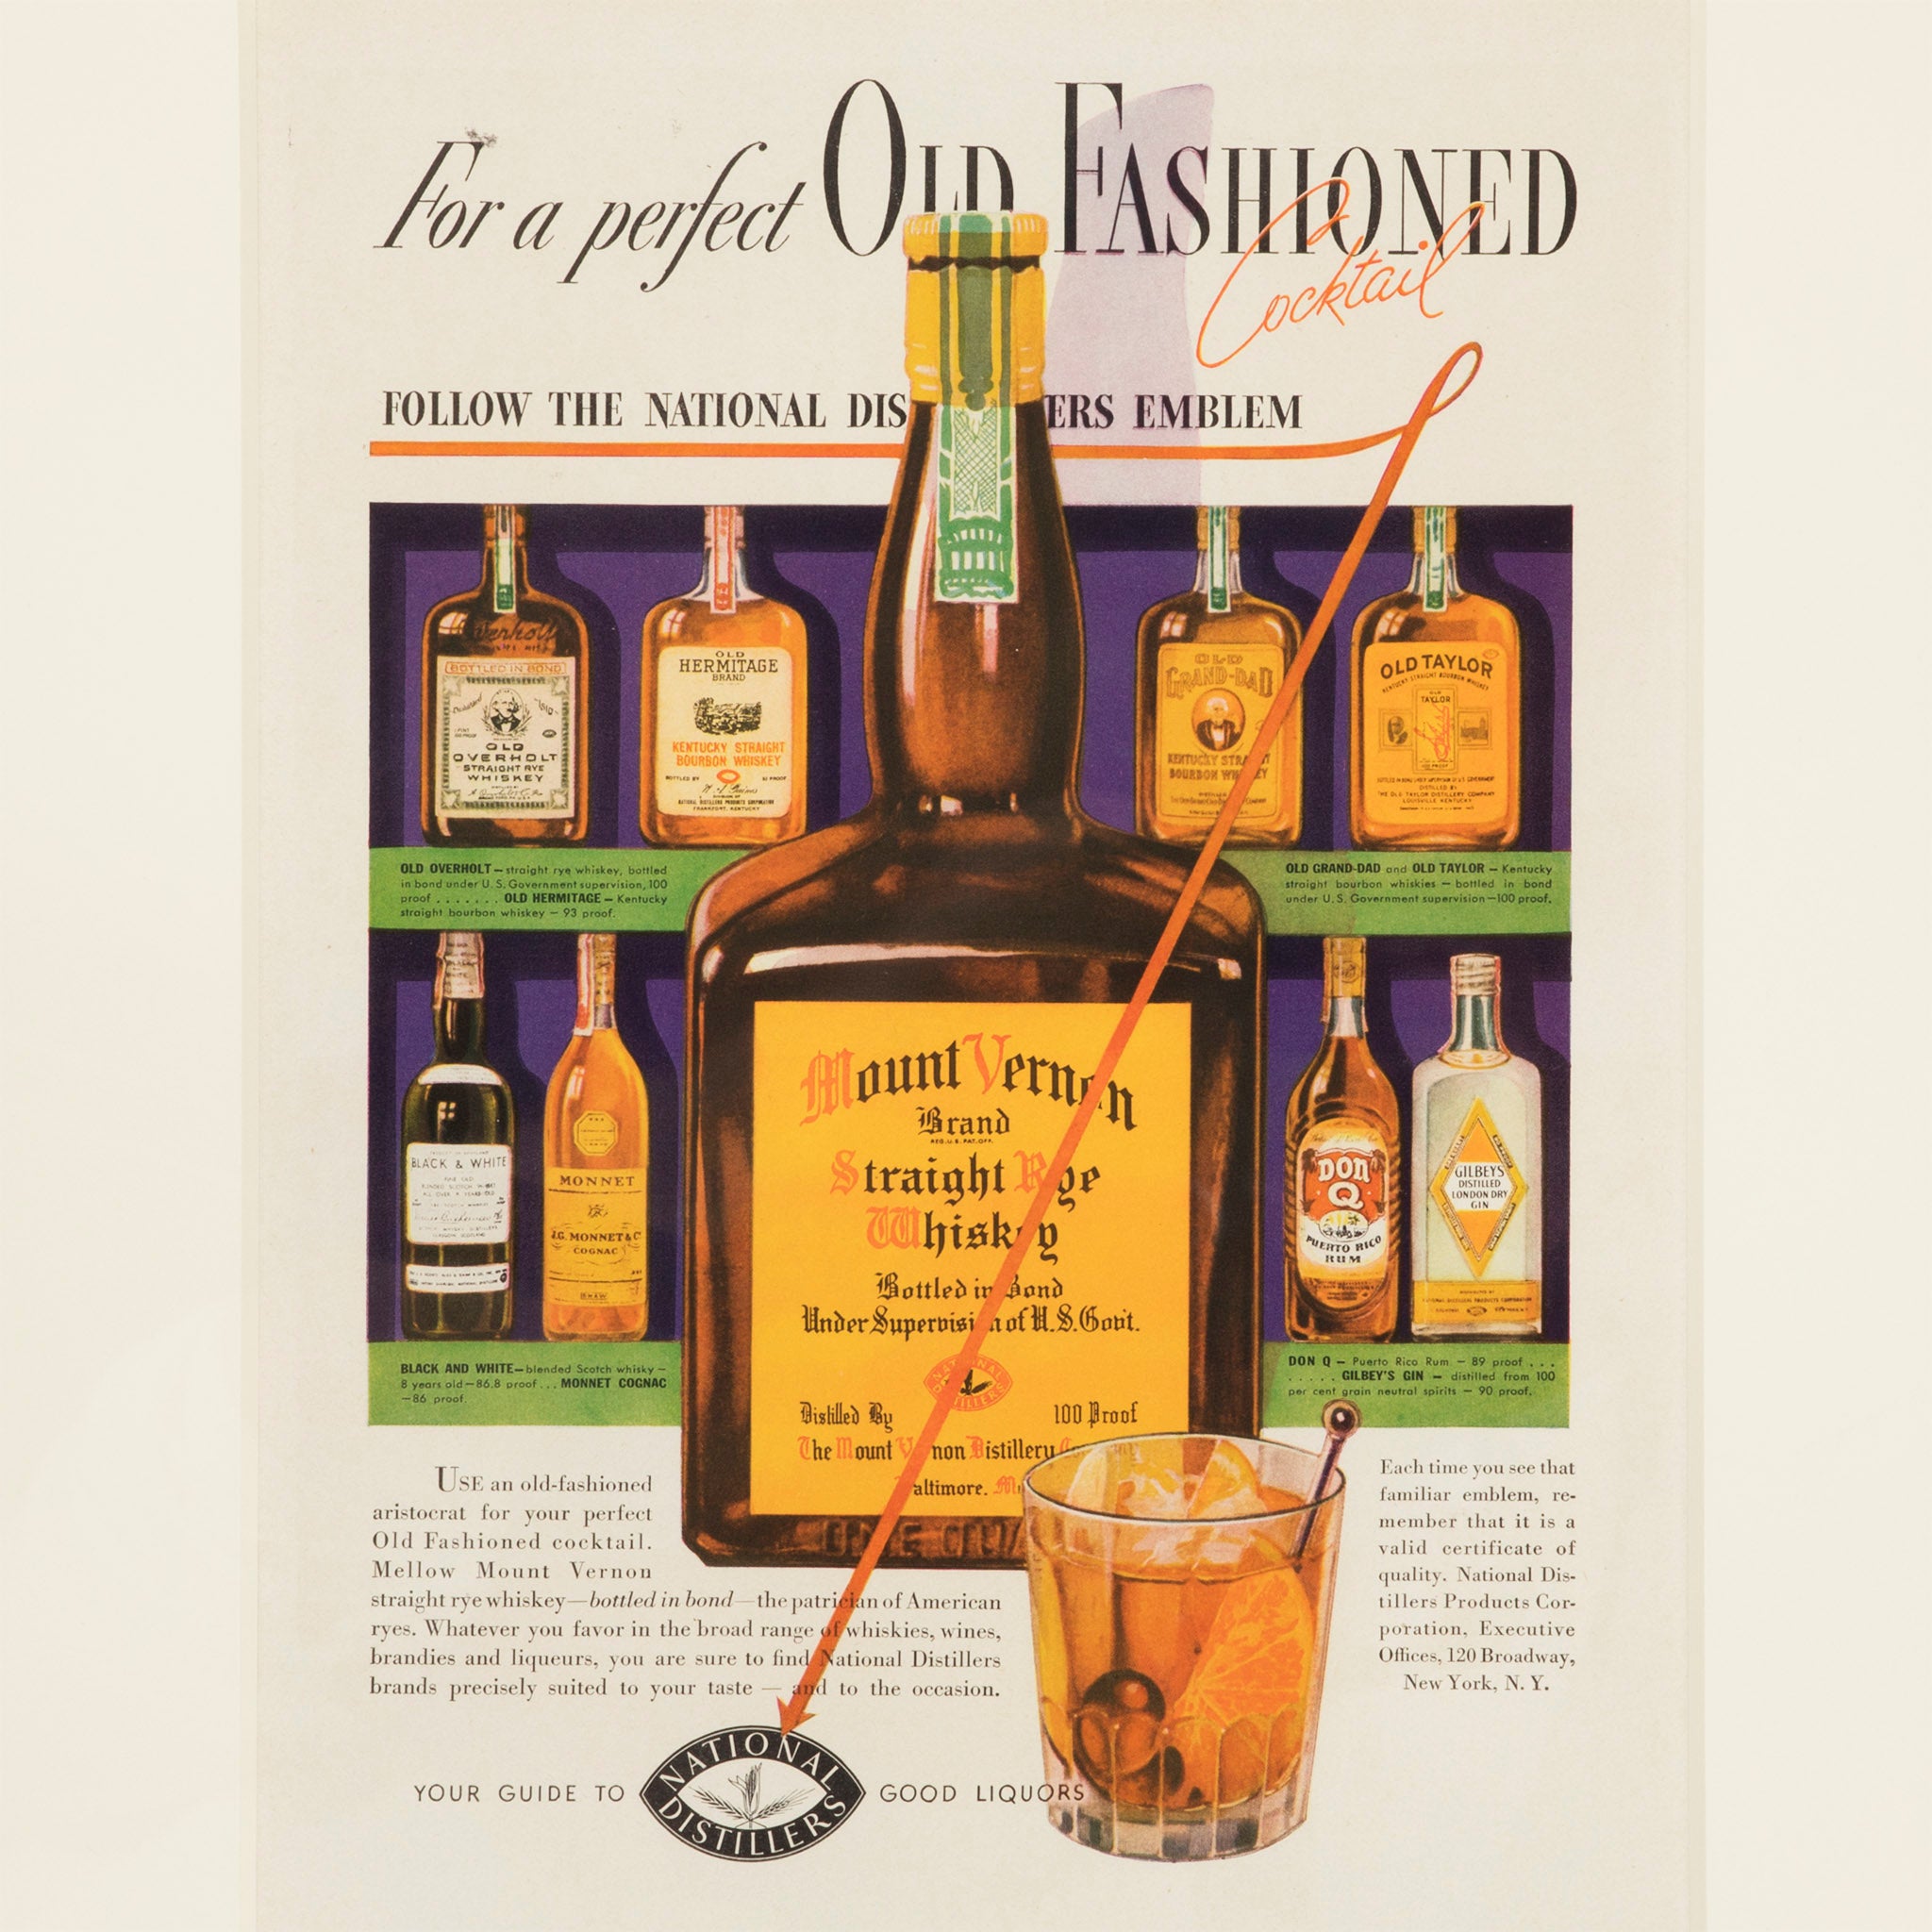 Mount Vernon Rye Whiskey Old Fashioned Cocktail Advertisement